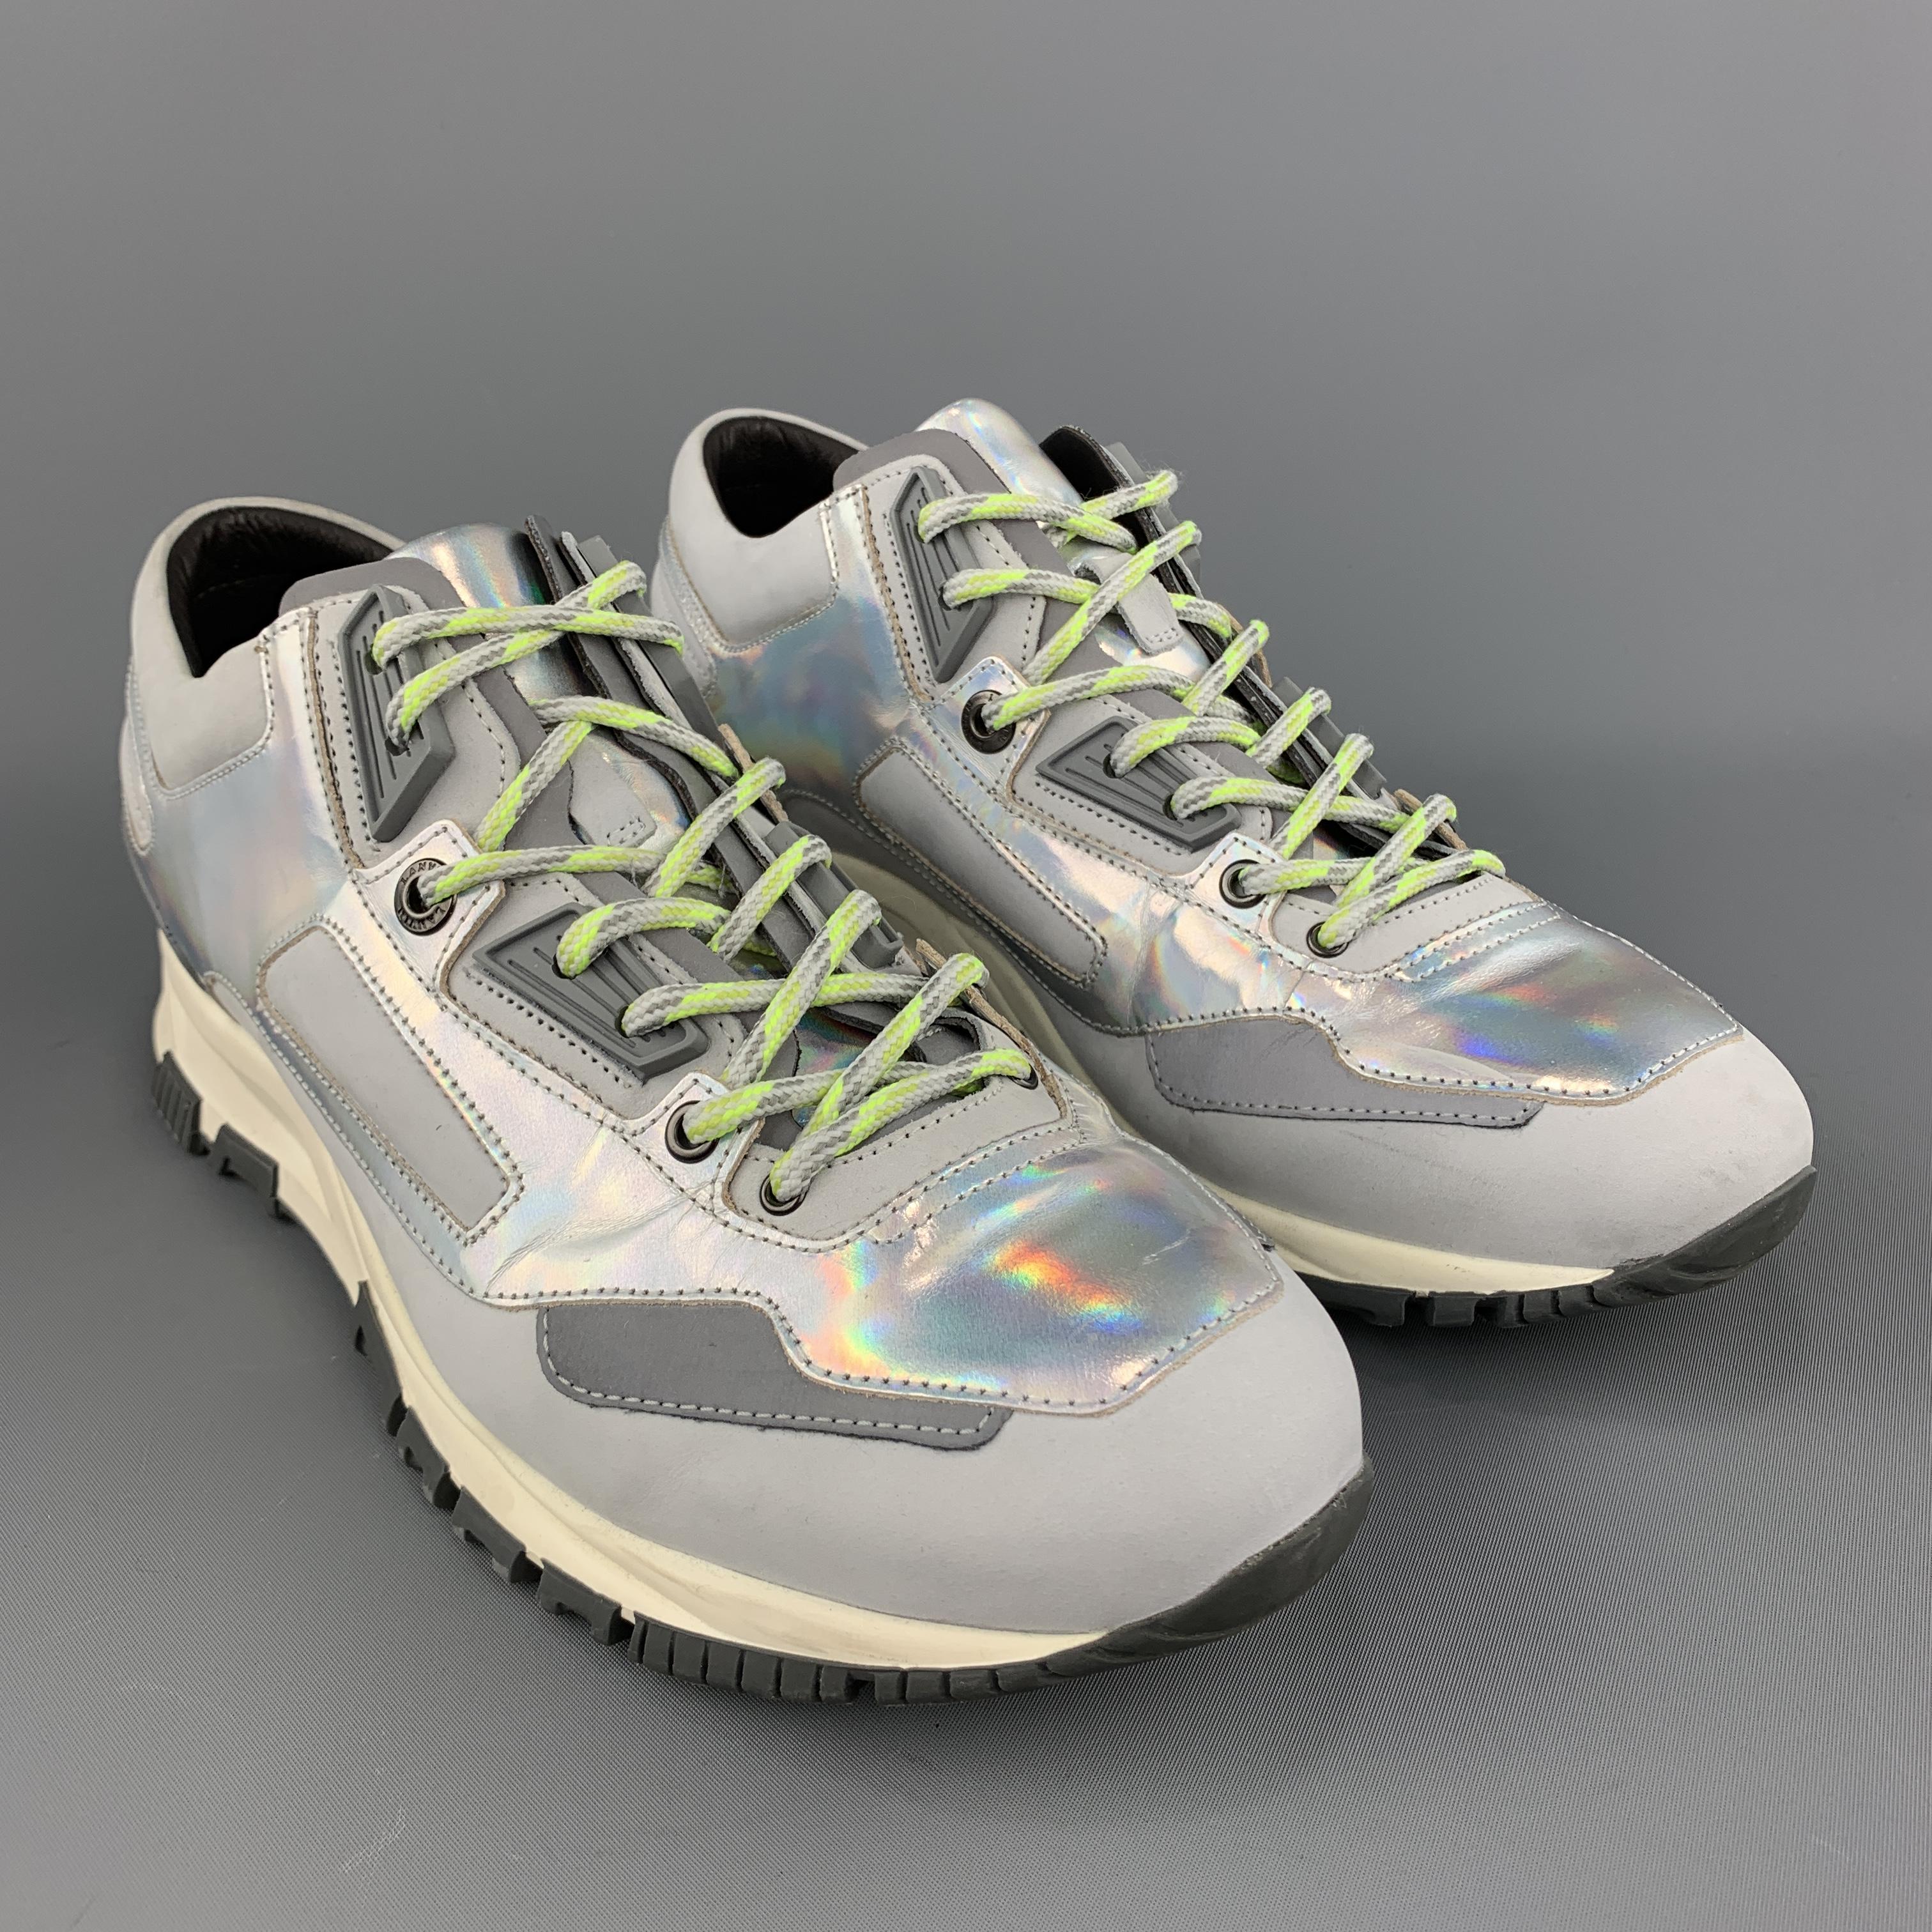 LANVIN sneakers come in silver gray fabric with holographic panels and reflective accents. With box. Made in Portugal.
 
Very Good Pre-Owned Condition.
Marked: UK 8
 
Outsole: 11.75 x 4.25 in.